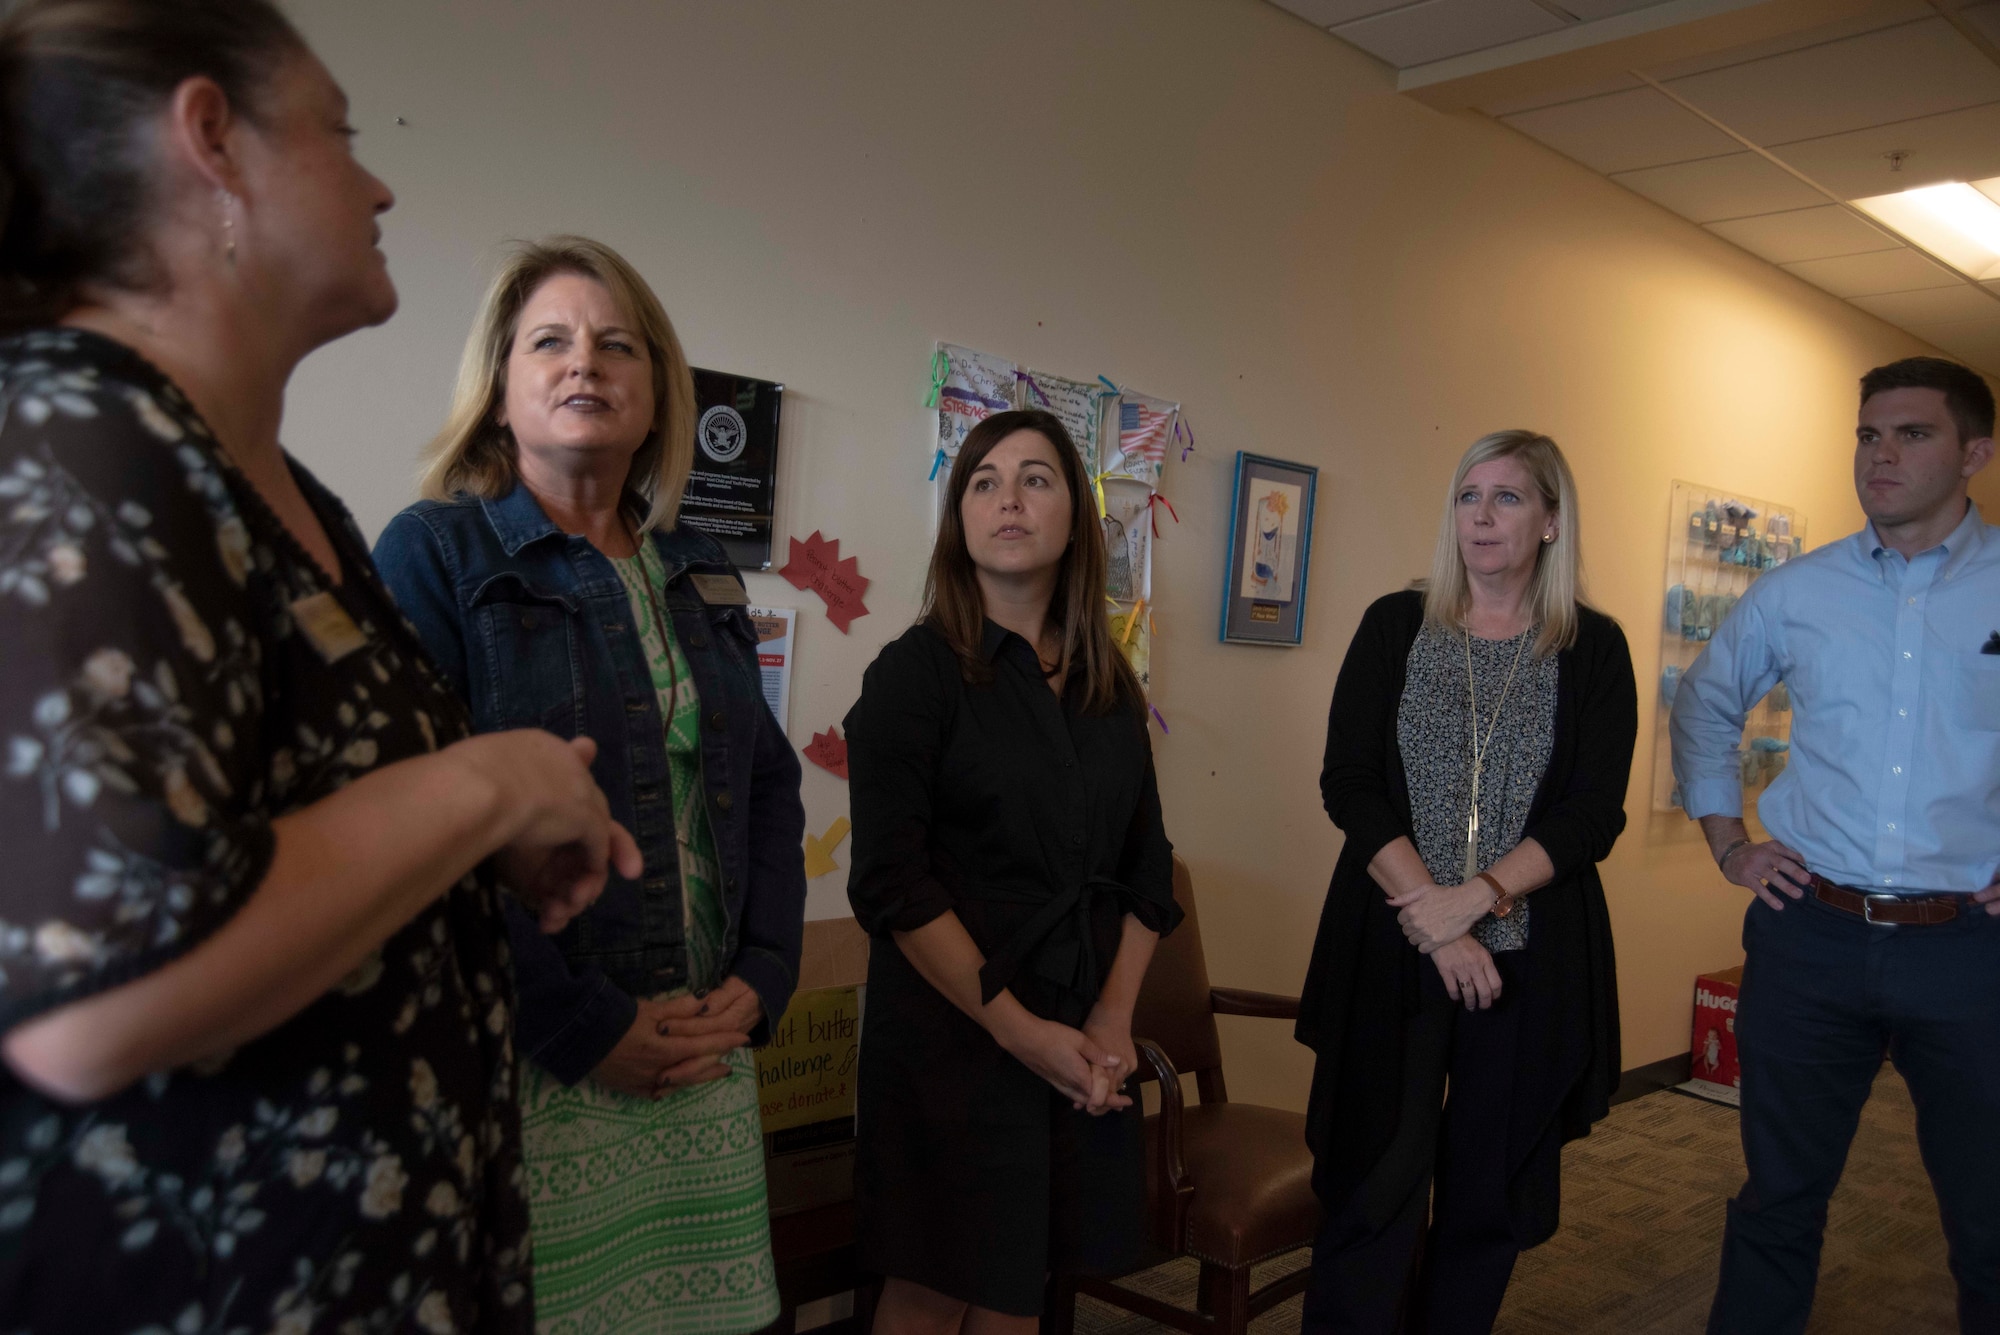 Cynthia DeDeo, 325th Force Support Squadron Child and Youth Services director, left, and Tamara Turnmeyer, 325th FSS Child and Youth Services flight chief, right, give a tour to several members of the Senate Appropriations Committee of the base's Child Development Center Oct. 28, 2019, at Tyndall Air Force Base, Florida. The CDC is currently being co-operated out of the fitness center until a new CDC can be rebuilt in the coming years. The installation's previous CDC was destroyed by Hurricane Michael in 2018. (U.S. Air Force photo by Staff Sgt. Magen M. Reeves)